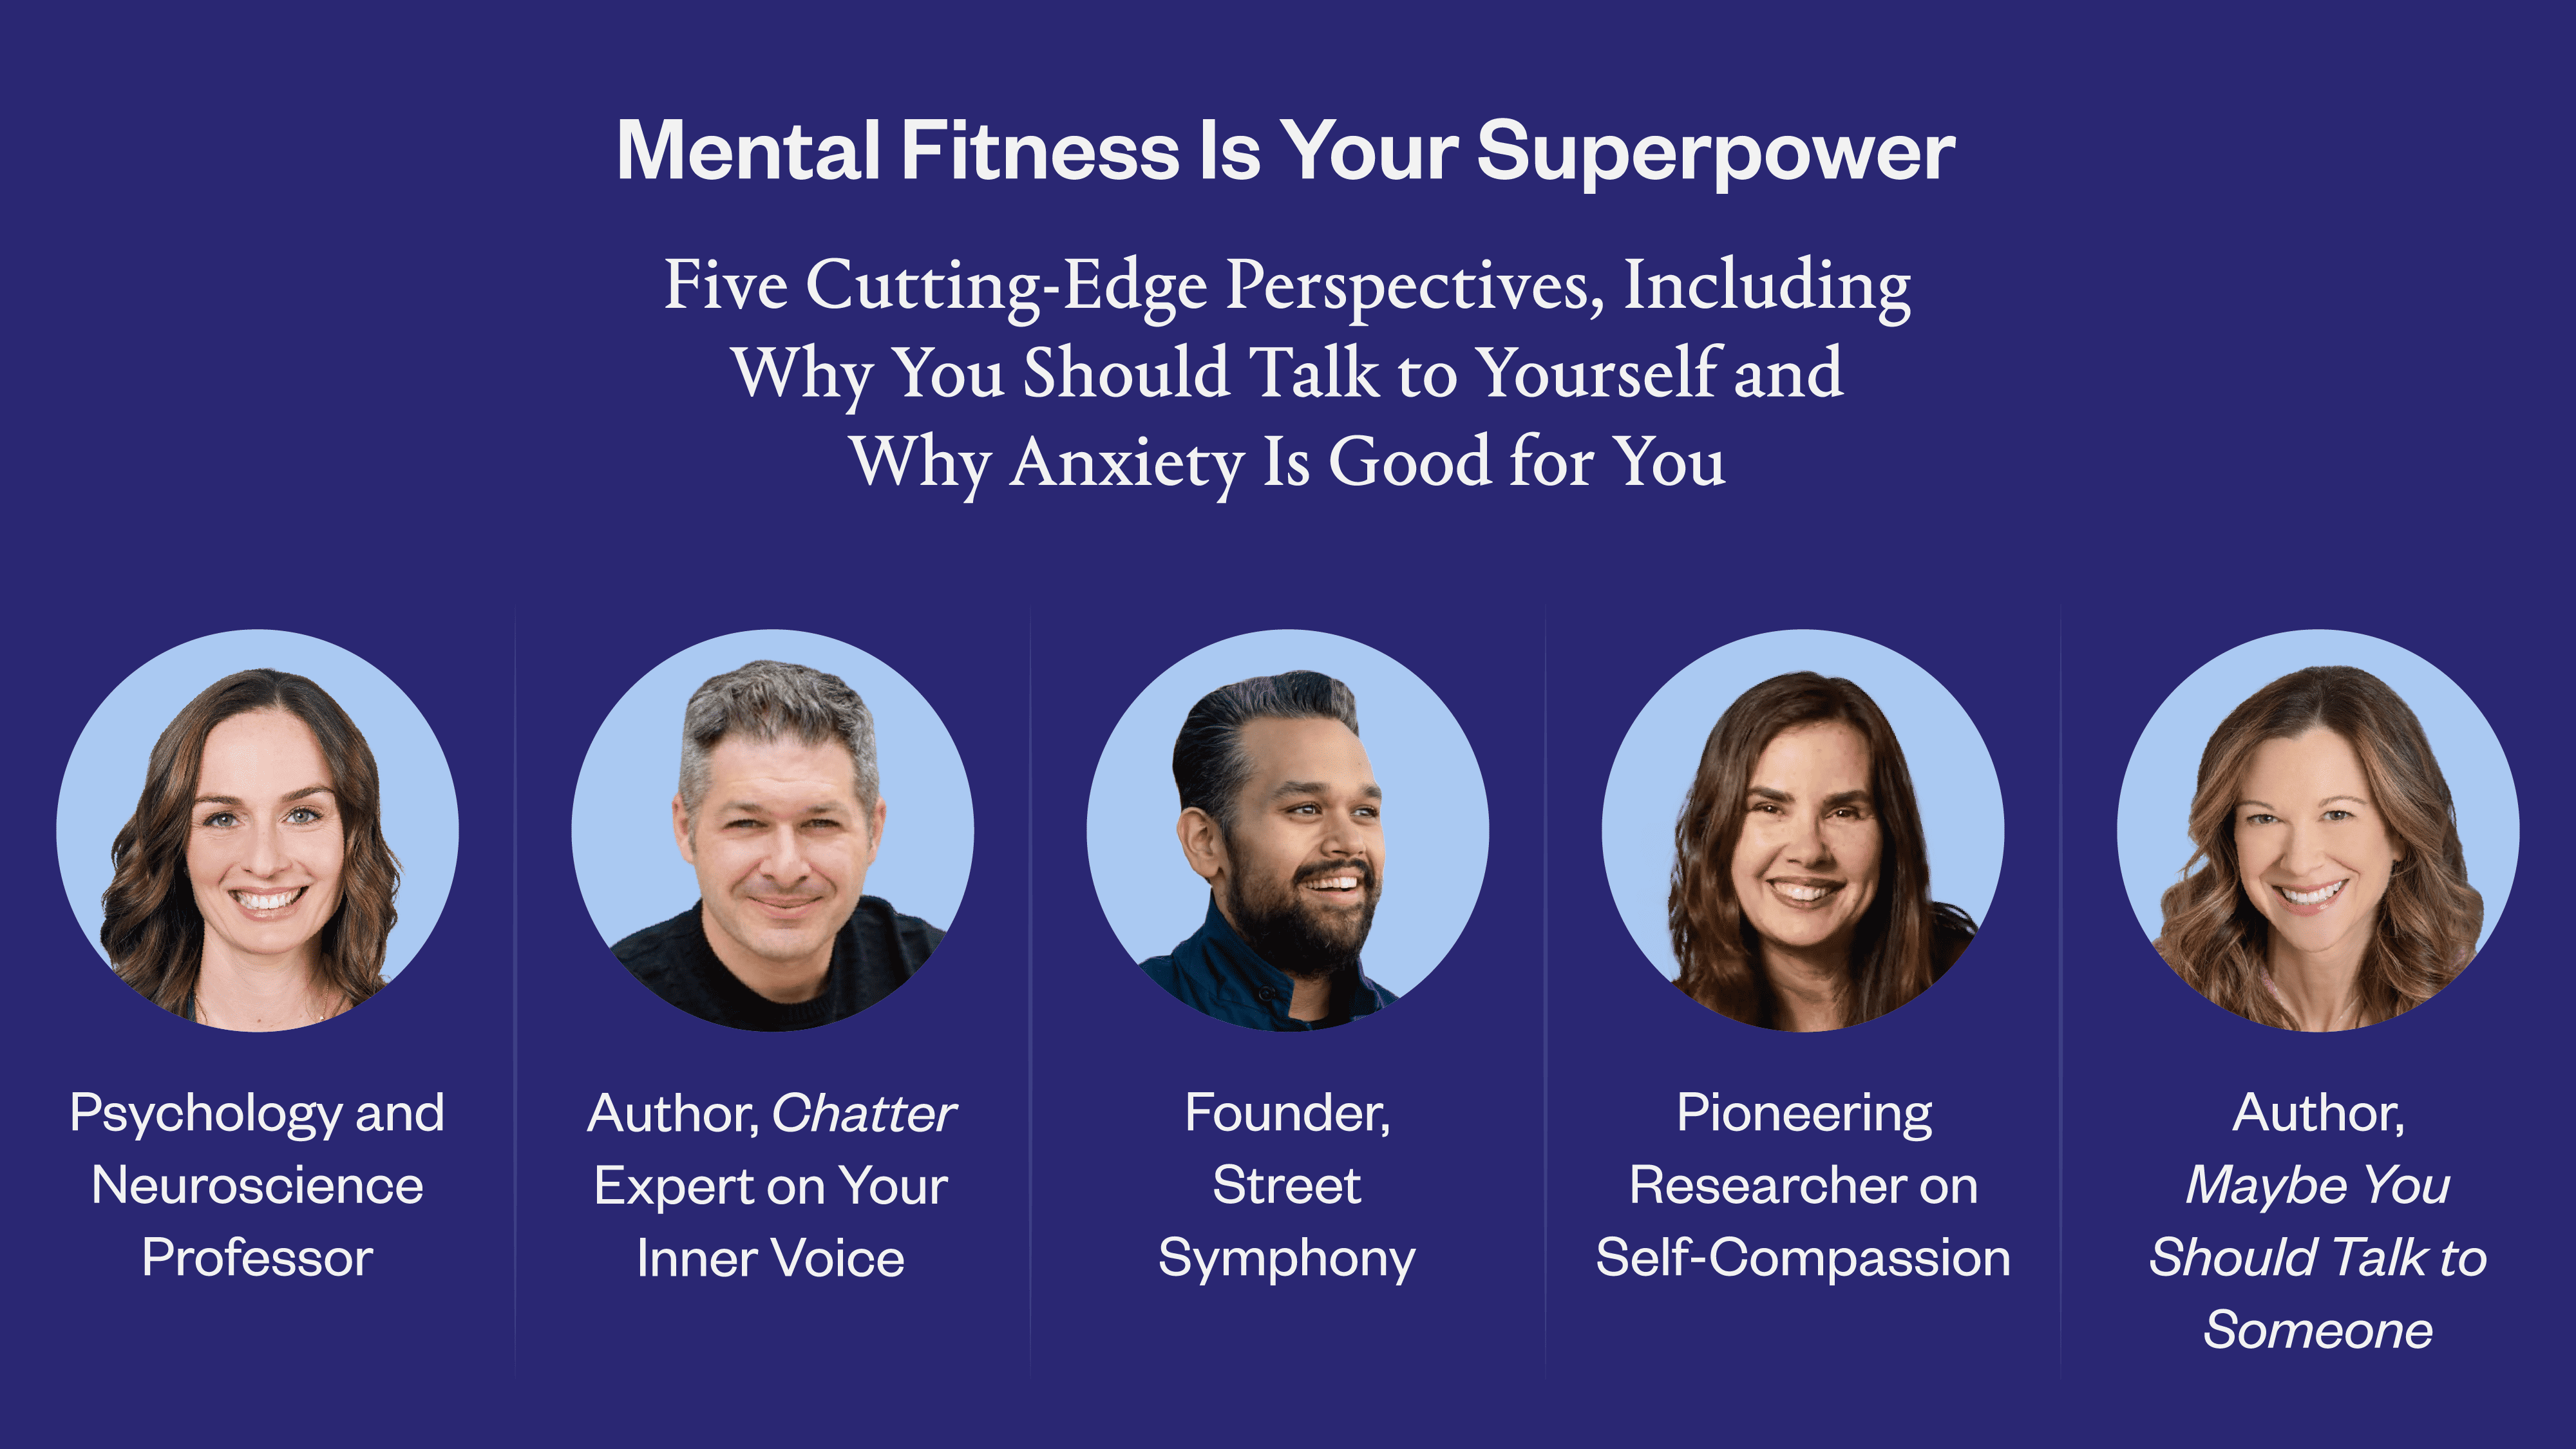 Mental Fitness Is Your Superpower: Five Perspectives on Unlocking the Best Version of Yourself and Your Team